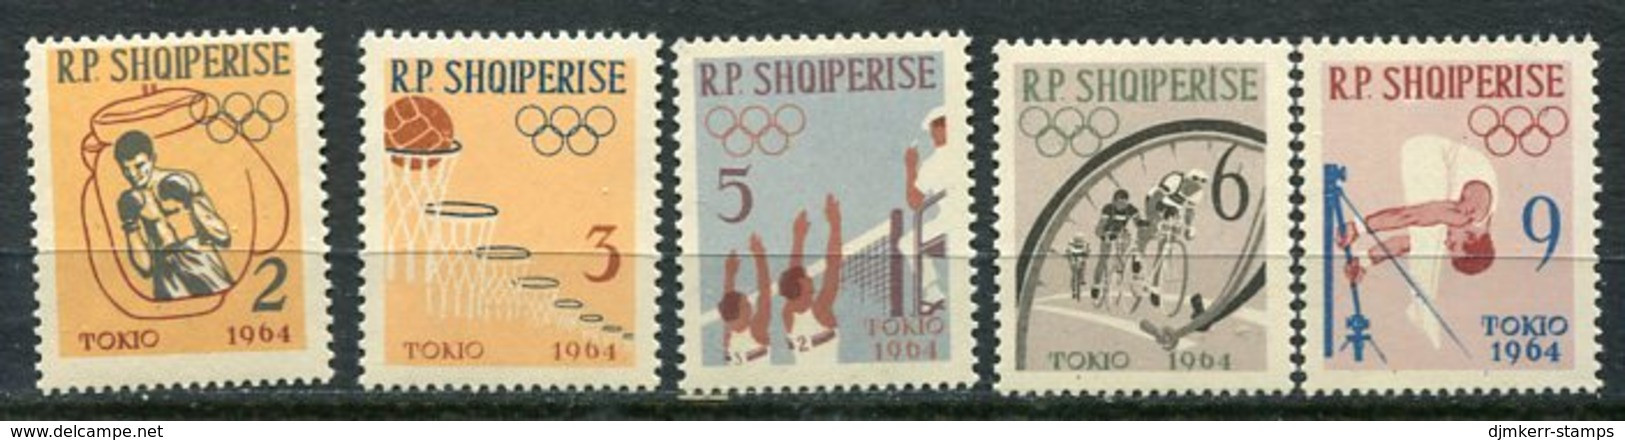 ALBANIA 1963 Olympic Games Perforated Set MNH / **  Michel 747-51A - Albania